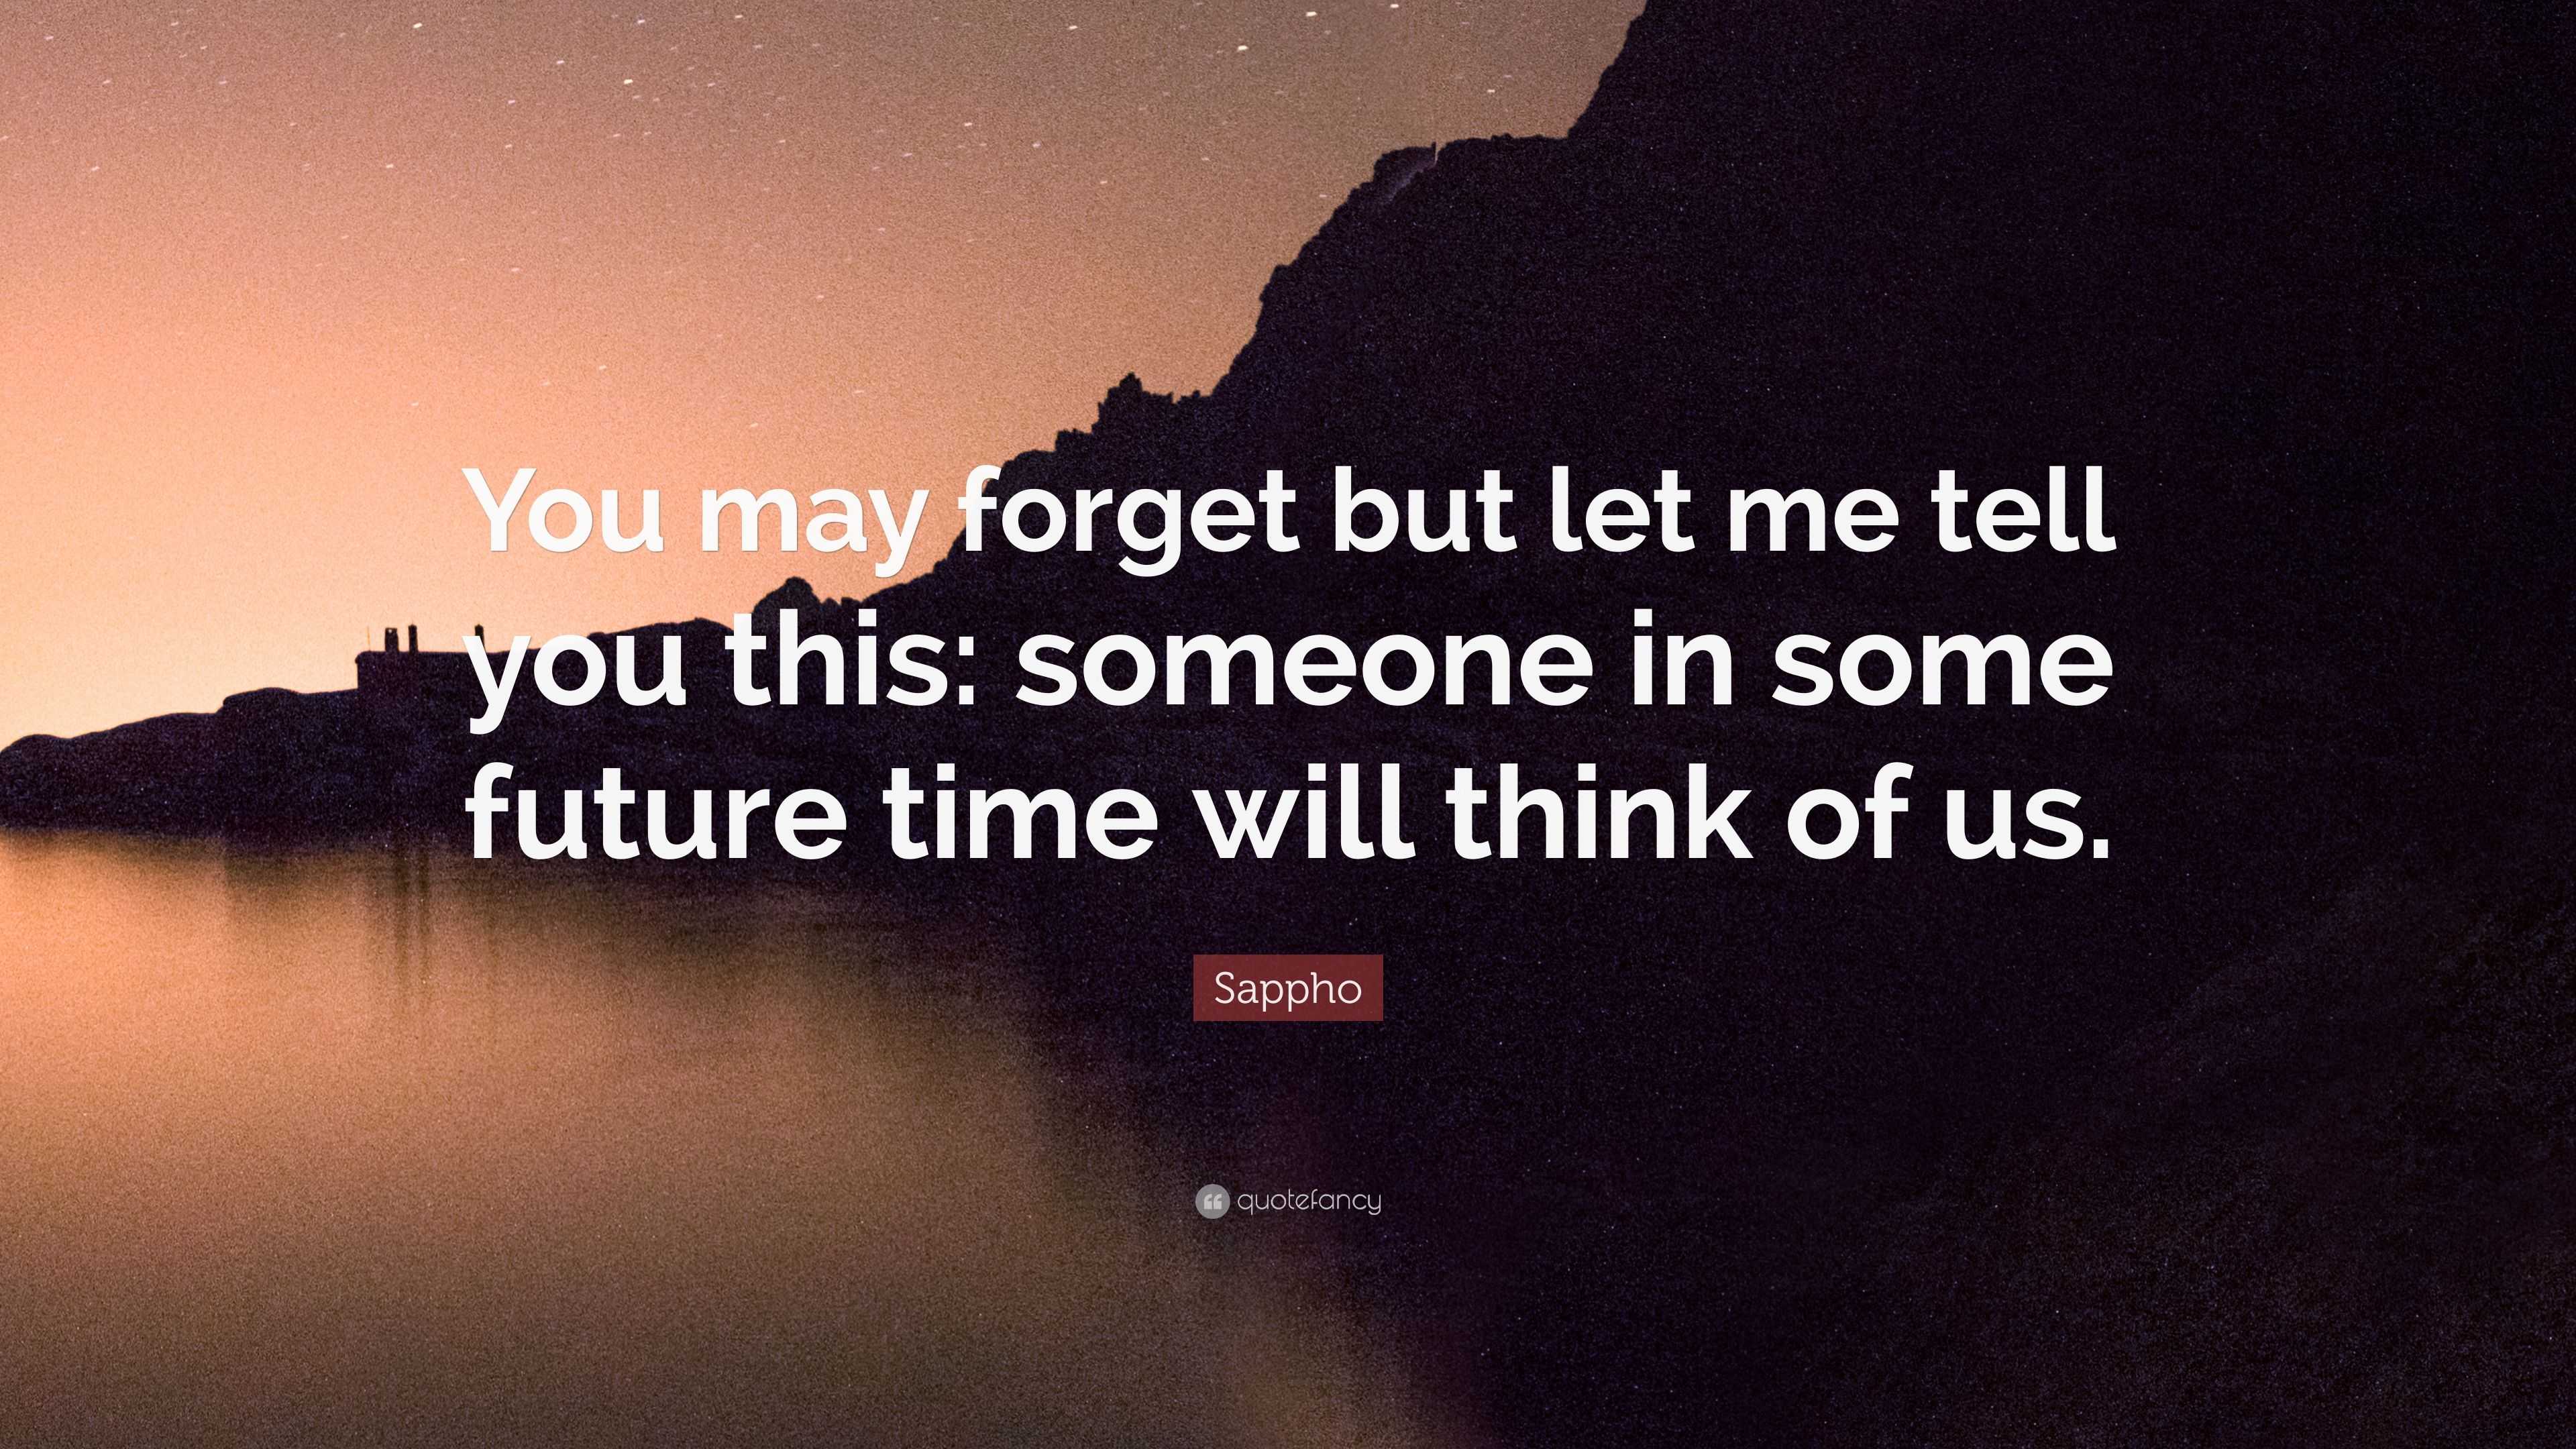 Sappho Quote: “You may forget but let me tell you this: someone in 